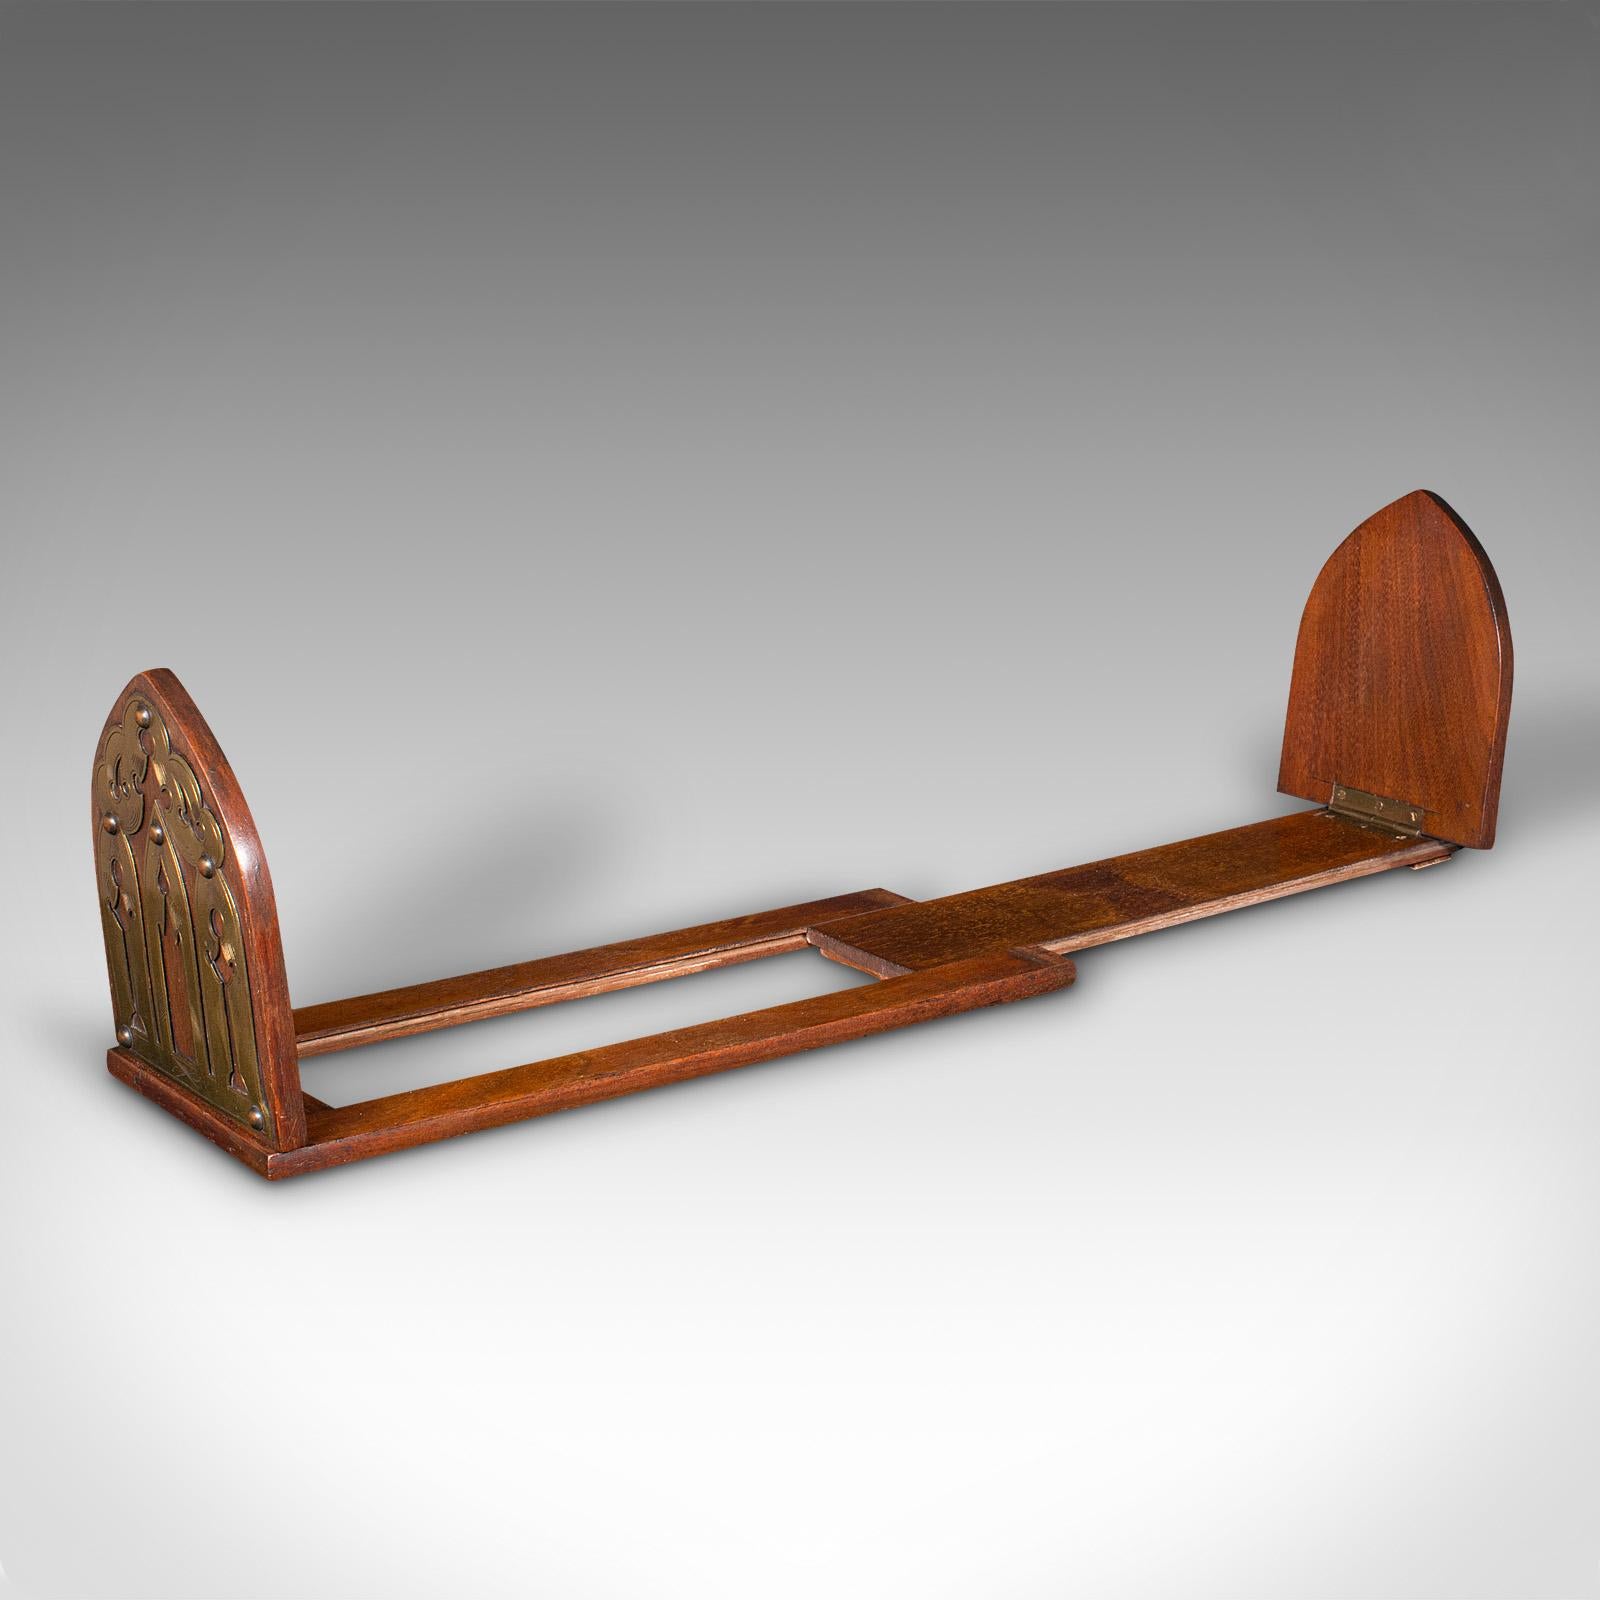 
This is an antique Gothic revival book slide. An English, walnut and brass extending bookrest, dating to the late Victorian period, circa 1880.

Accentuate your reading corner or desk with this charming slide
Displays a desirable aged patina and in